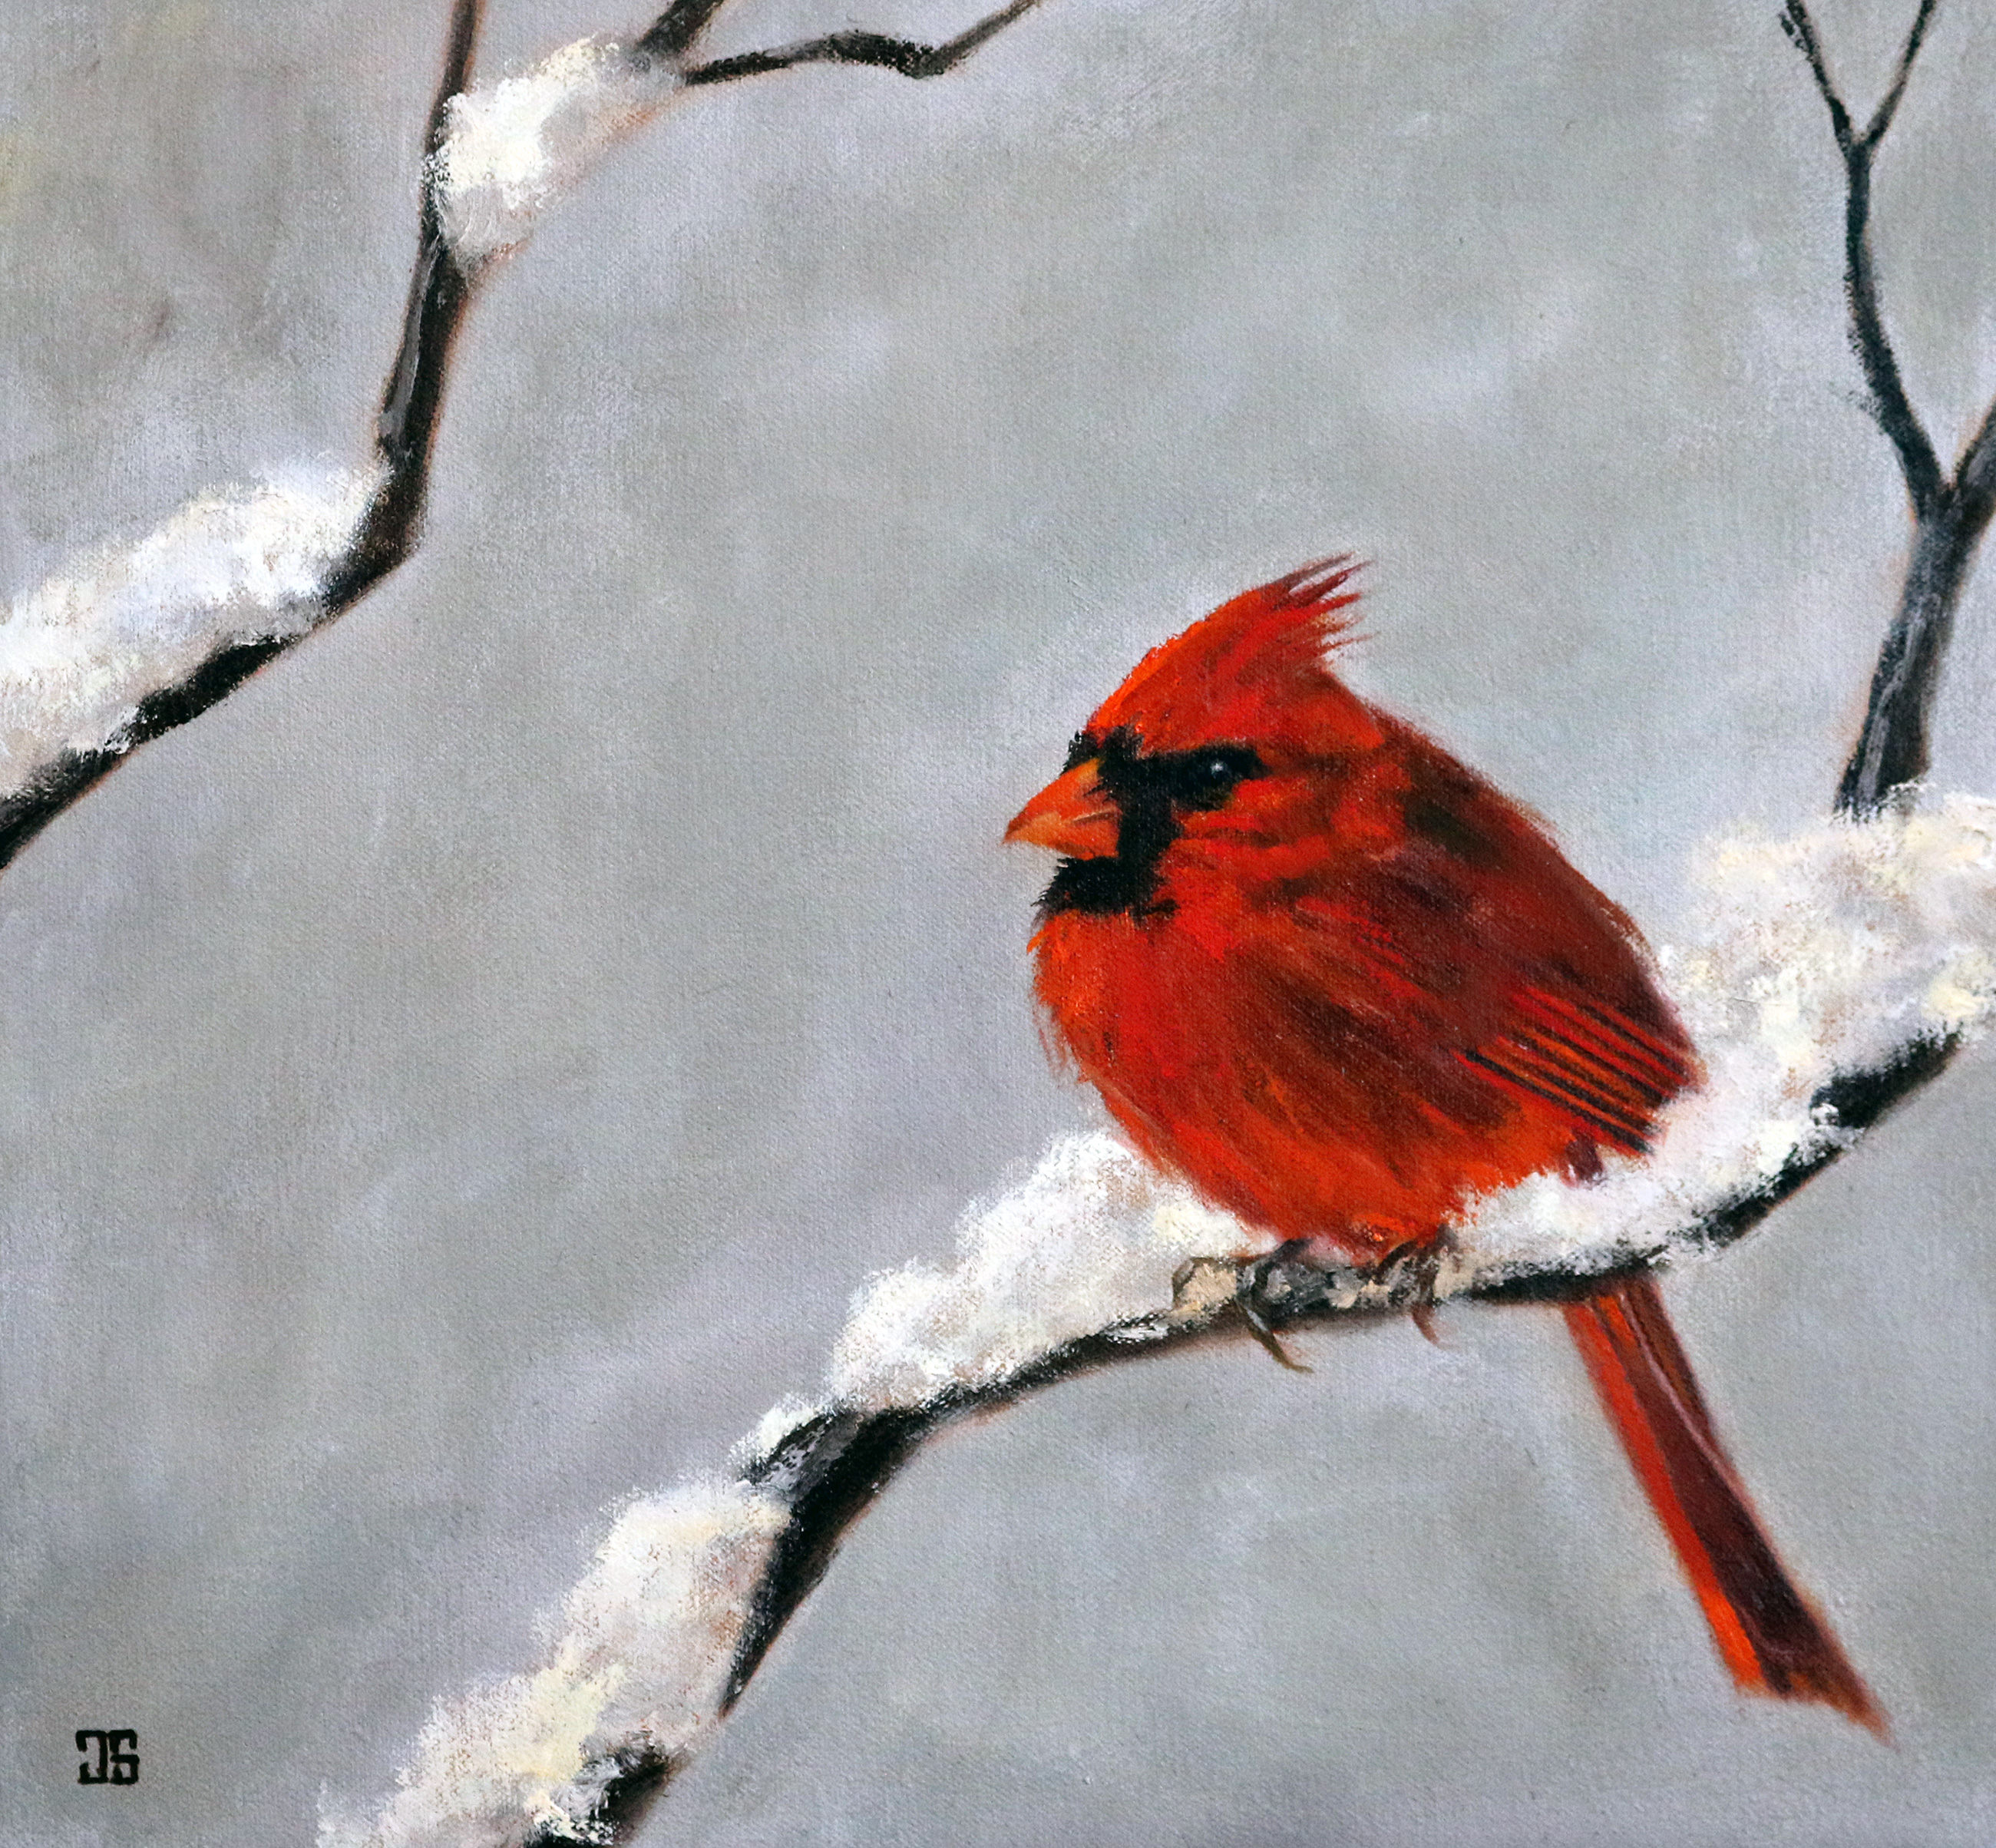 Oil painting "Cardinal in Snow" by Jeffrey Dale Starr